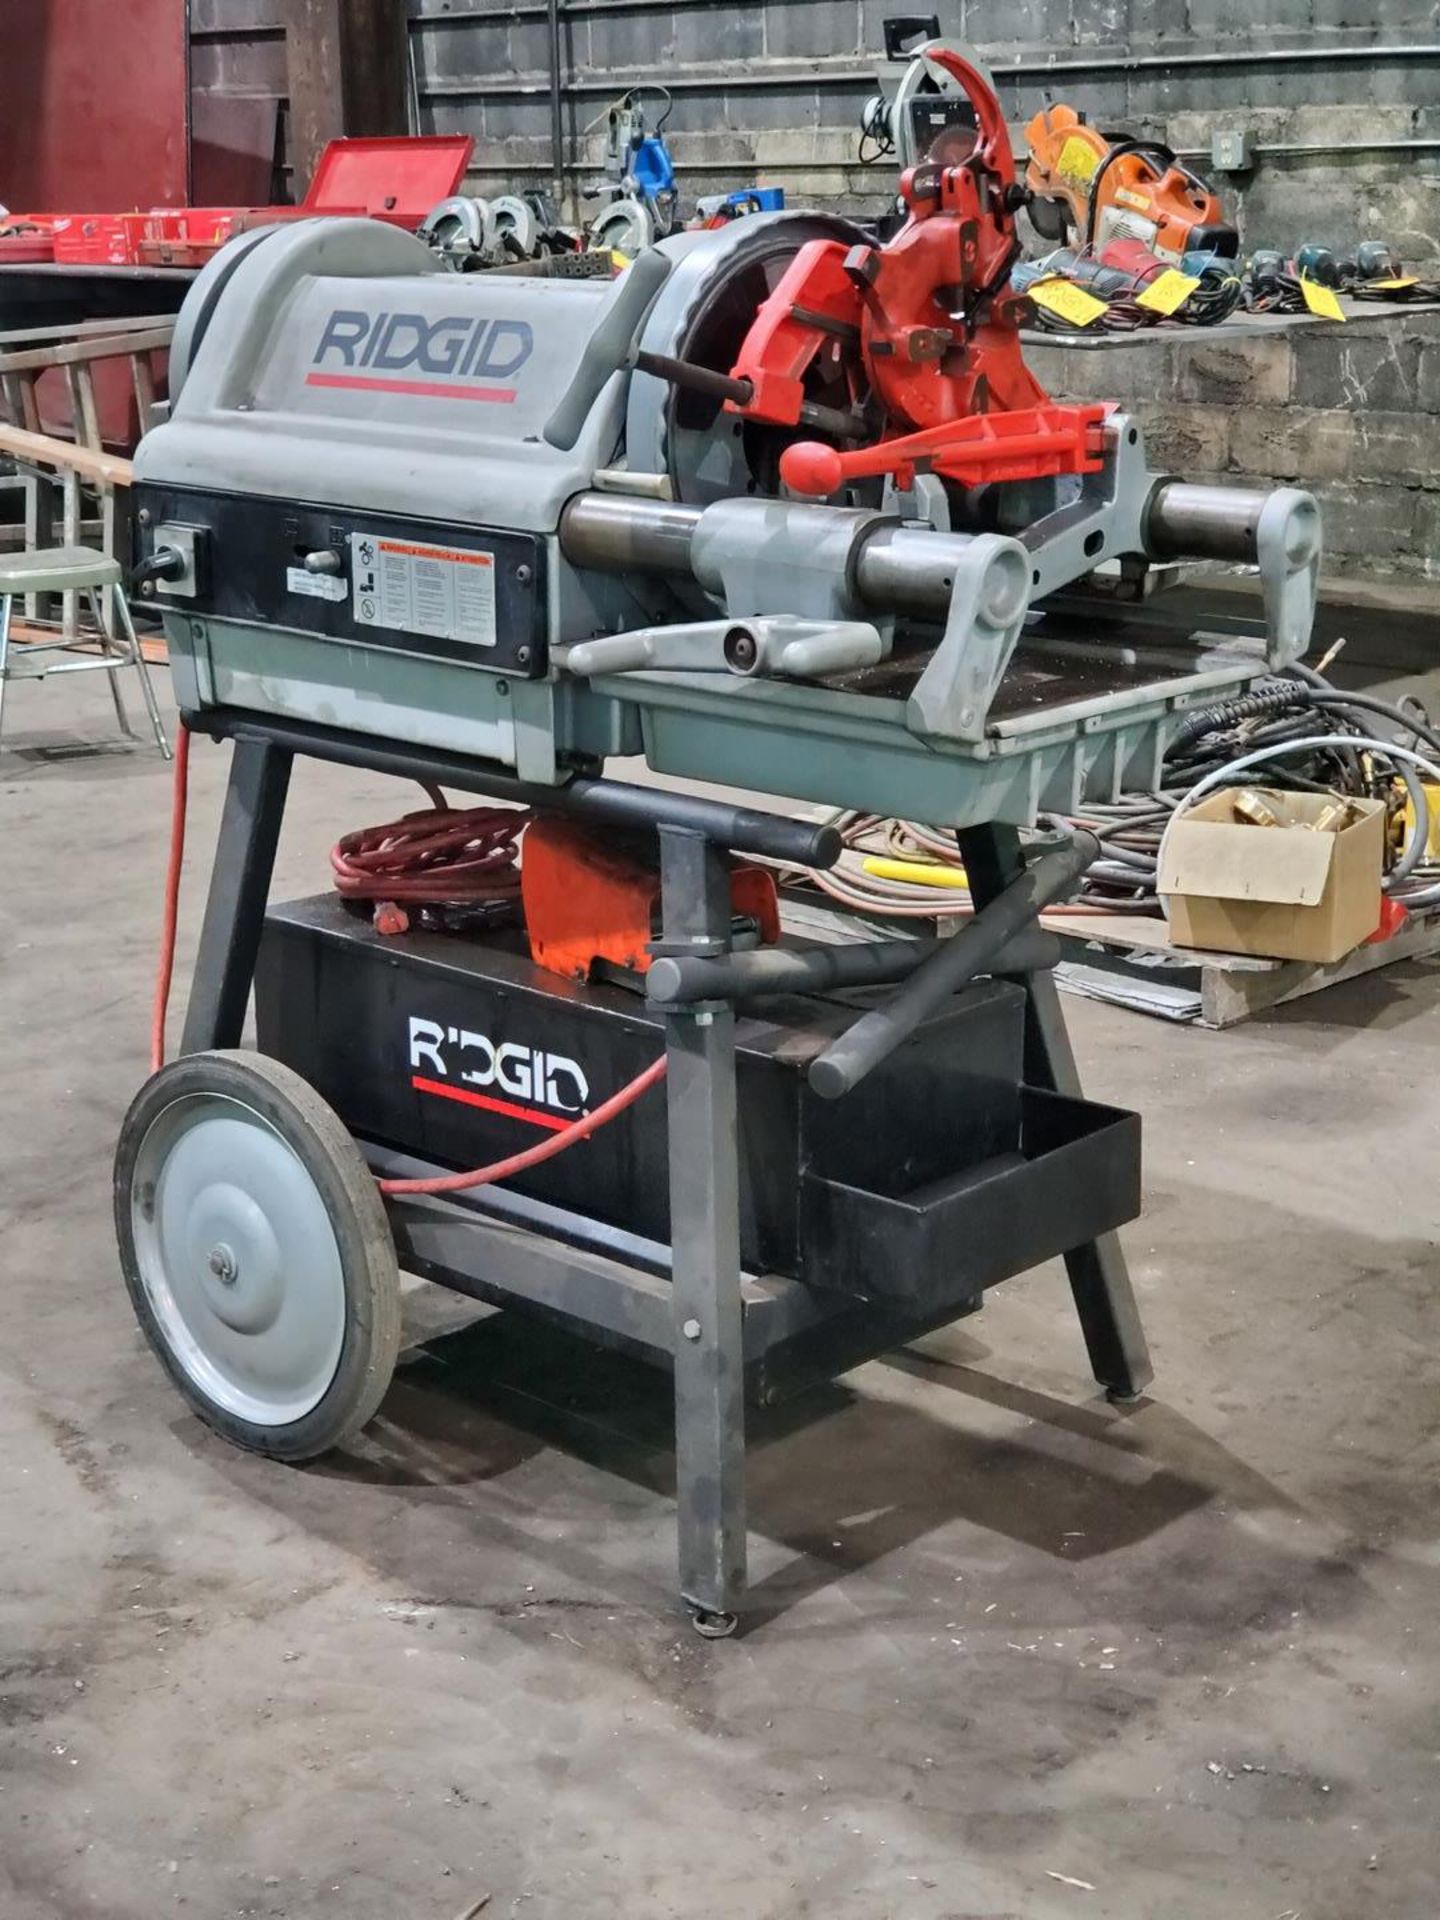 Ridgid 1224 Rolling Pipe Threader Up To 4" Cap.; 60HZ, 120V, 15A, 12/36RPM; W/ Foot Controller - Image 2 of 12